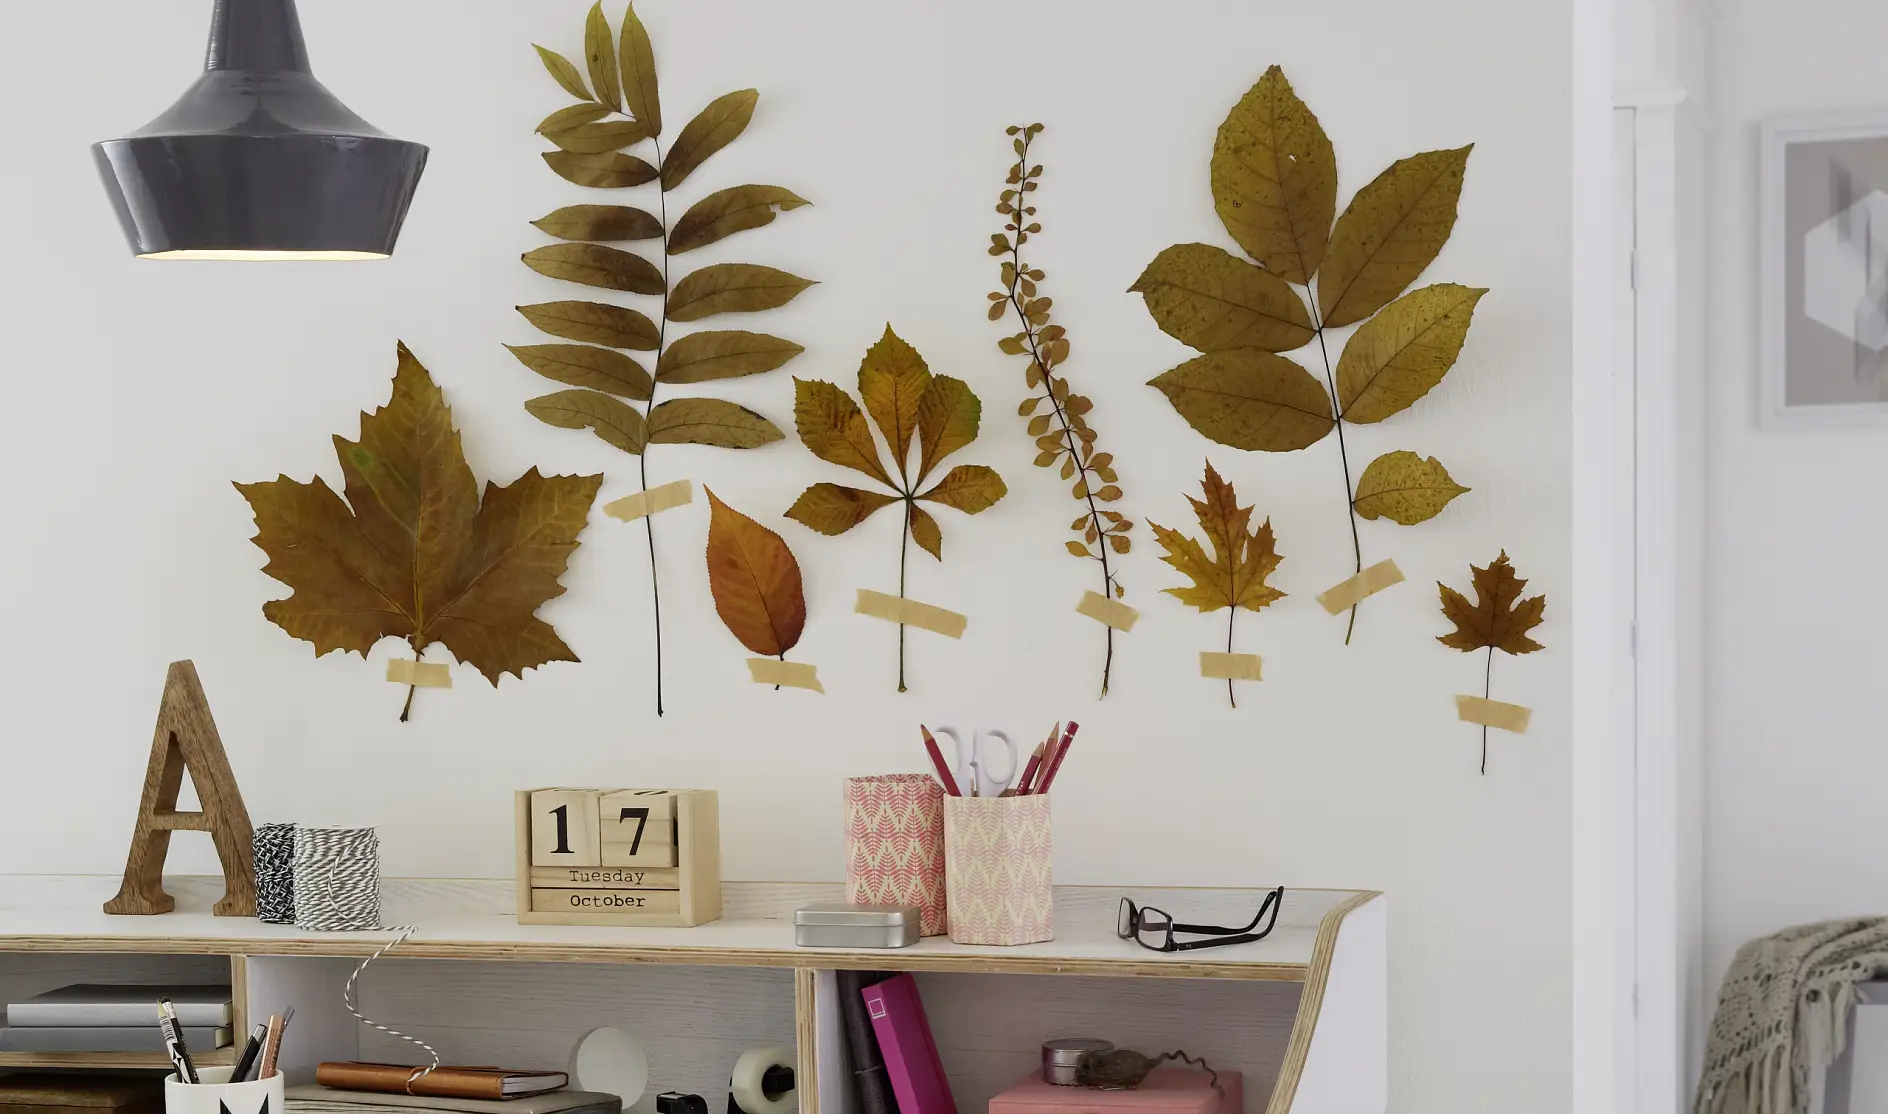 Stick leaves directly onto wall and create your own forest!